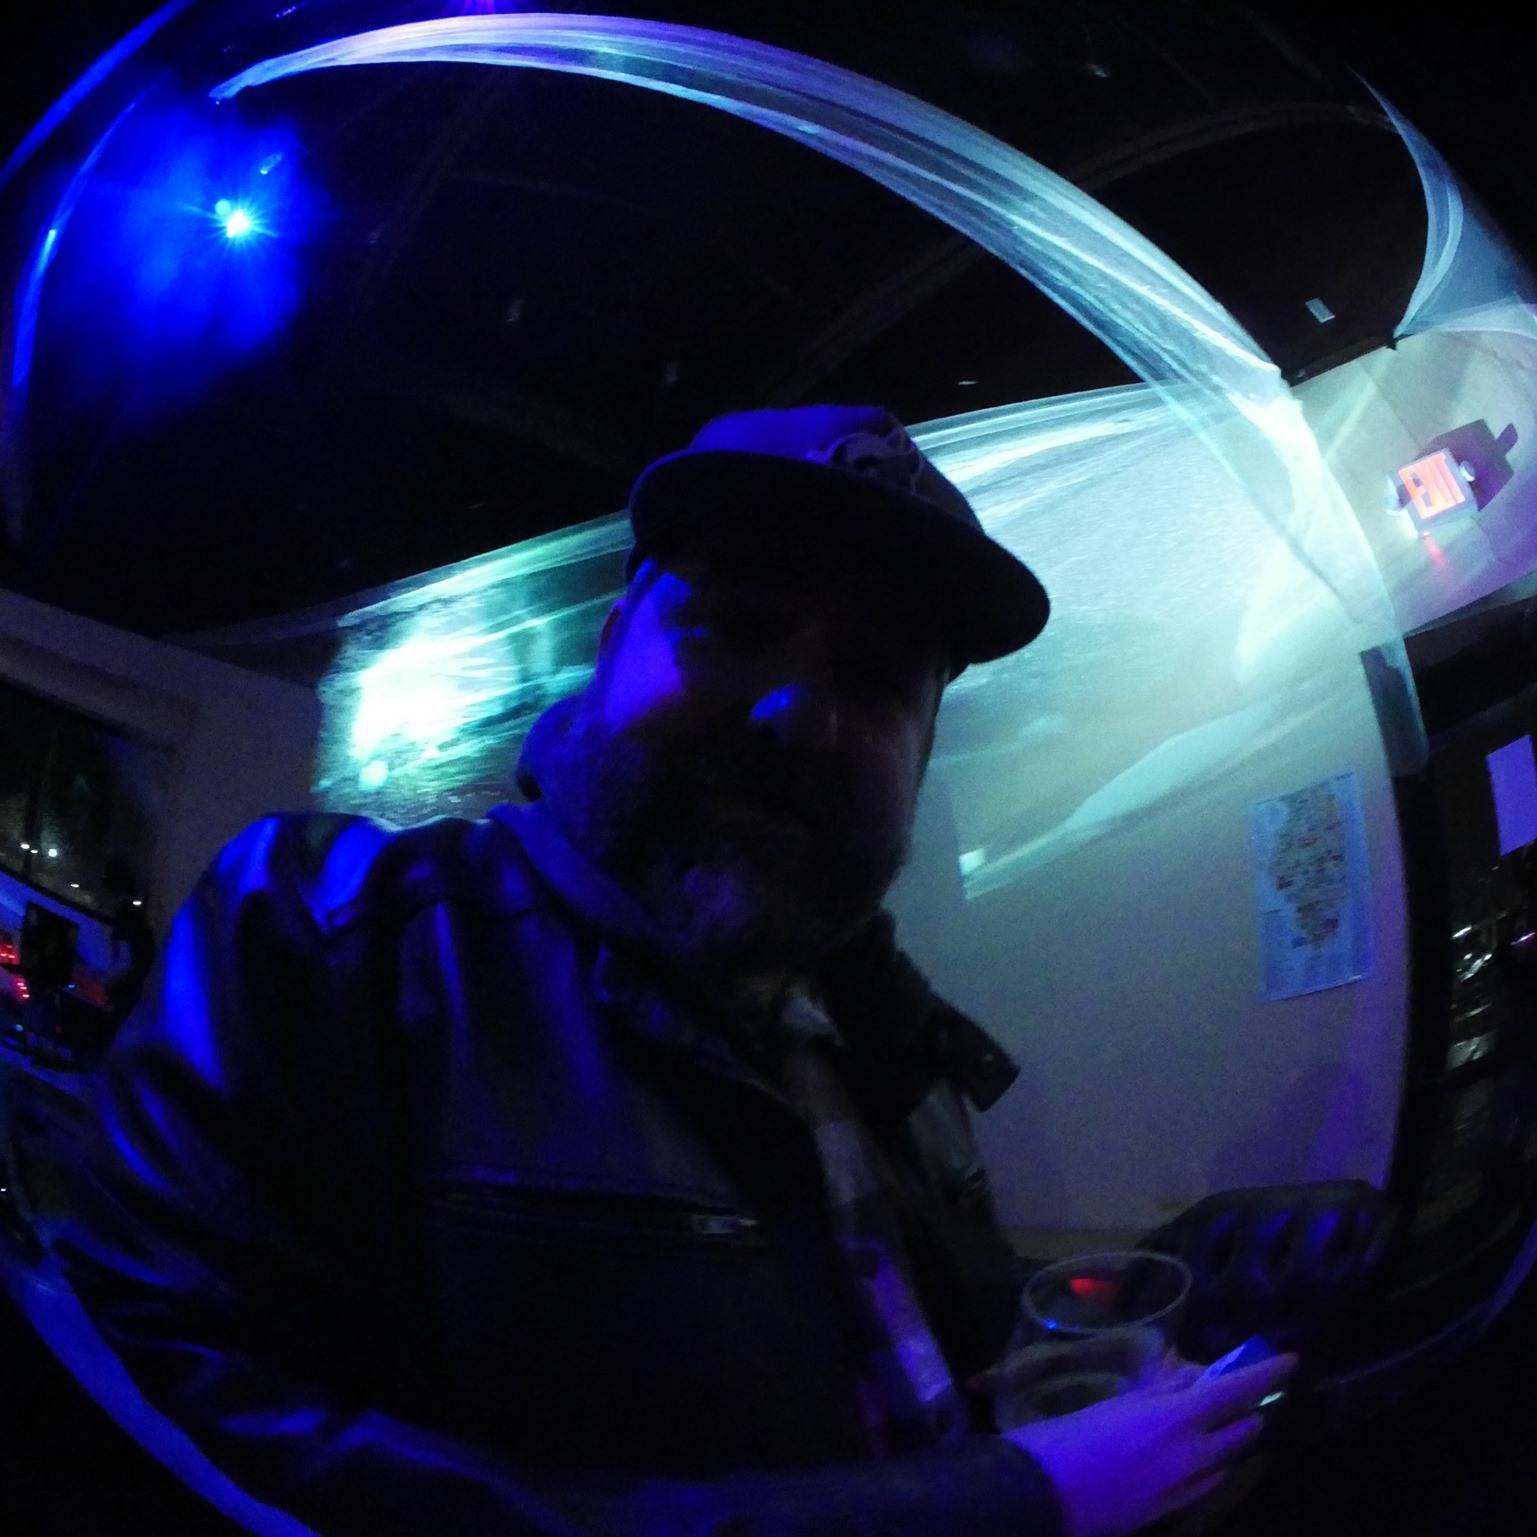 IMAGE: Dark image of a man wearing a black hat in a dark room with blue lights. There's an exit sign on the right side of the image. Photo by Matt Harsh.